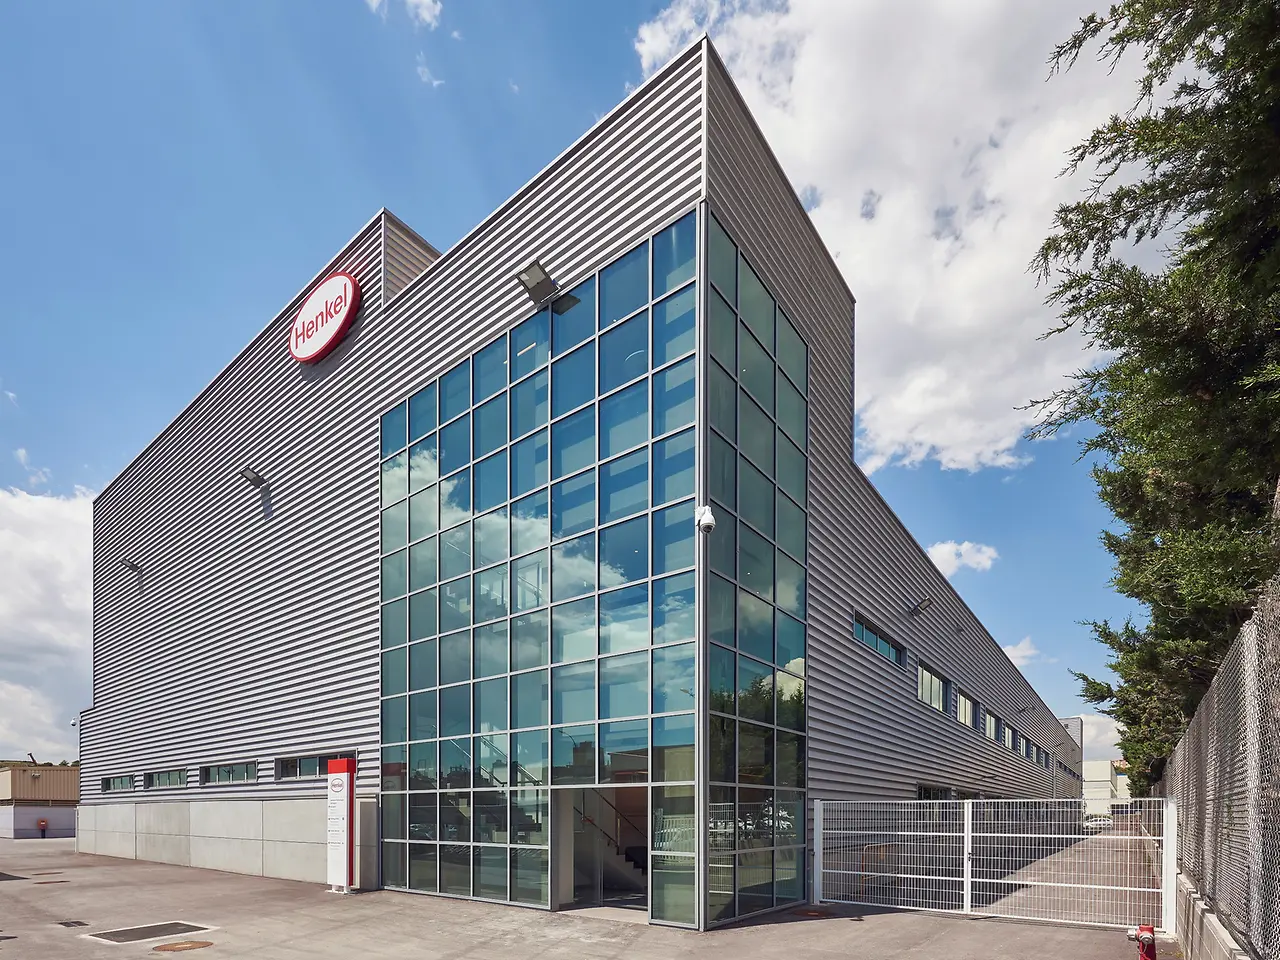 
The production facility in Montornés inaugurated in 2019 has been designed for the production of Henkel´s high-impact aerospace applications.